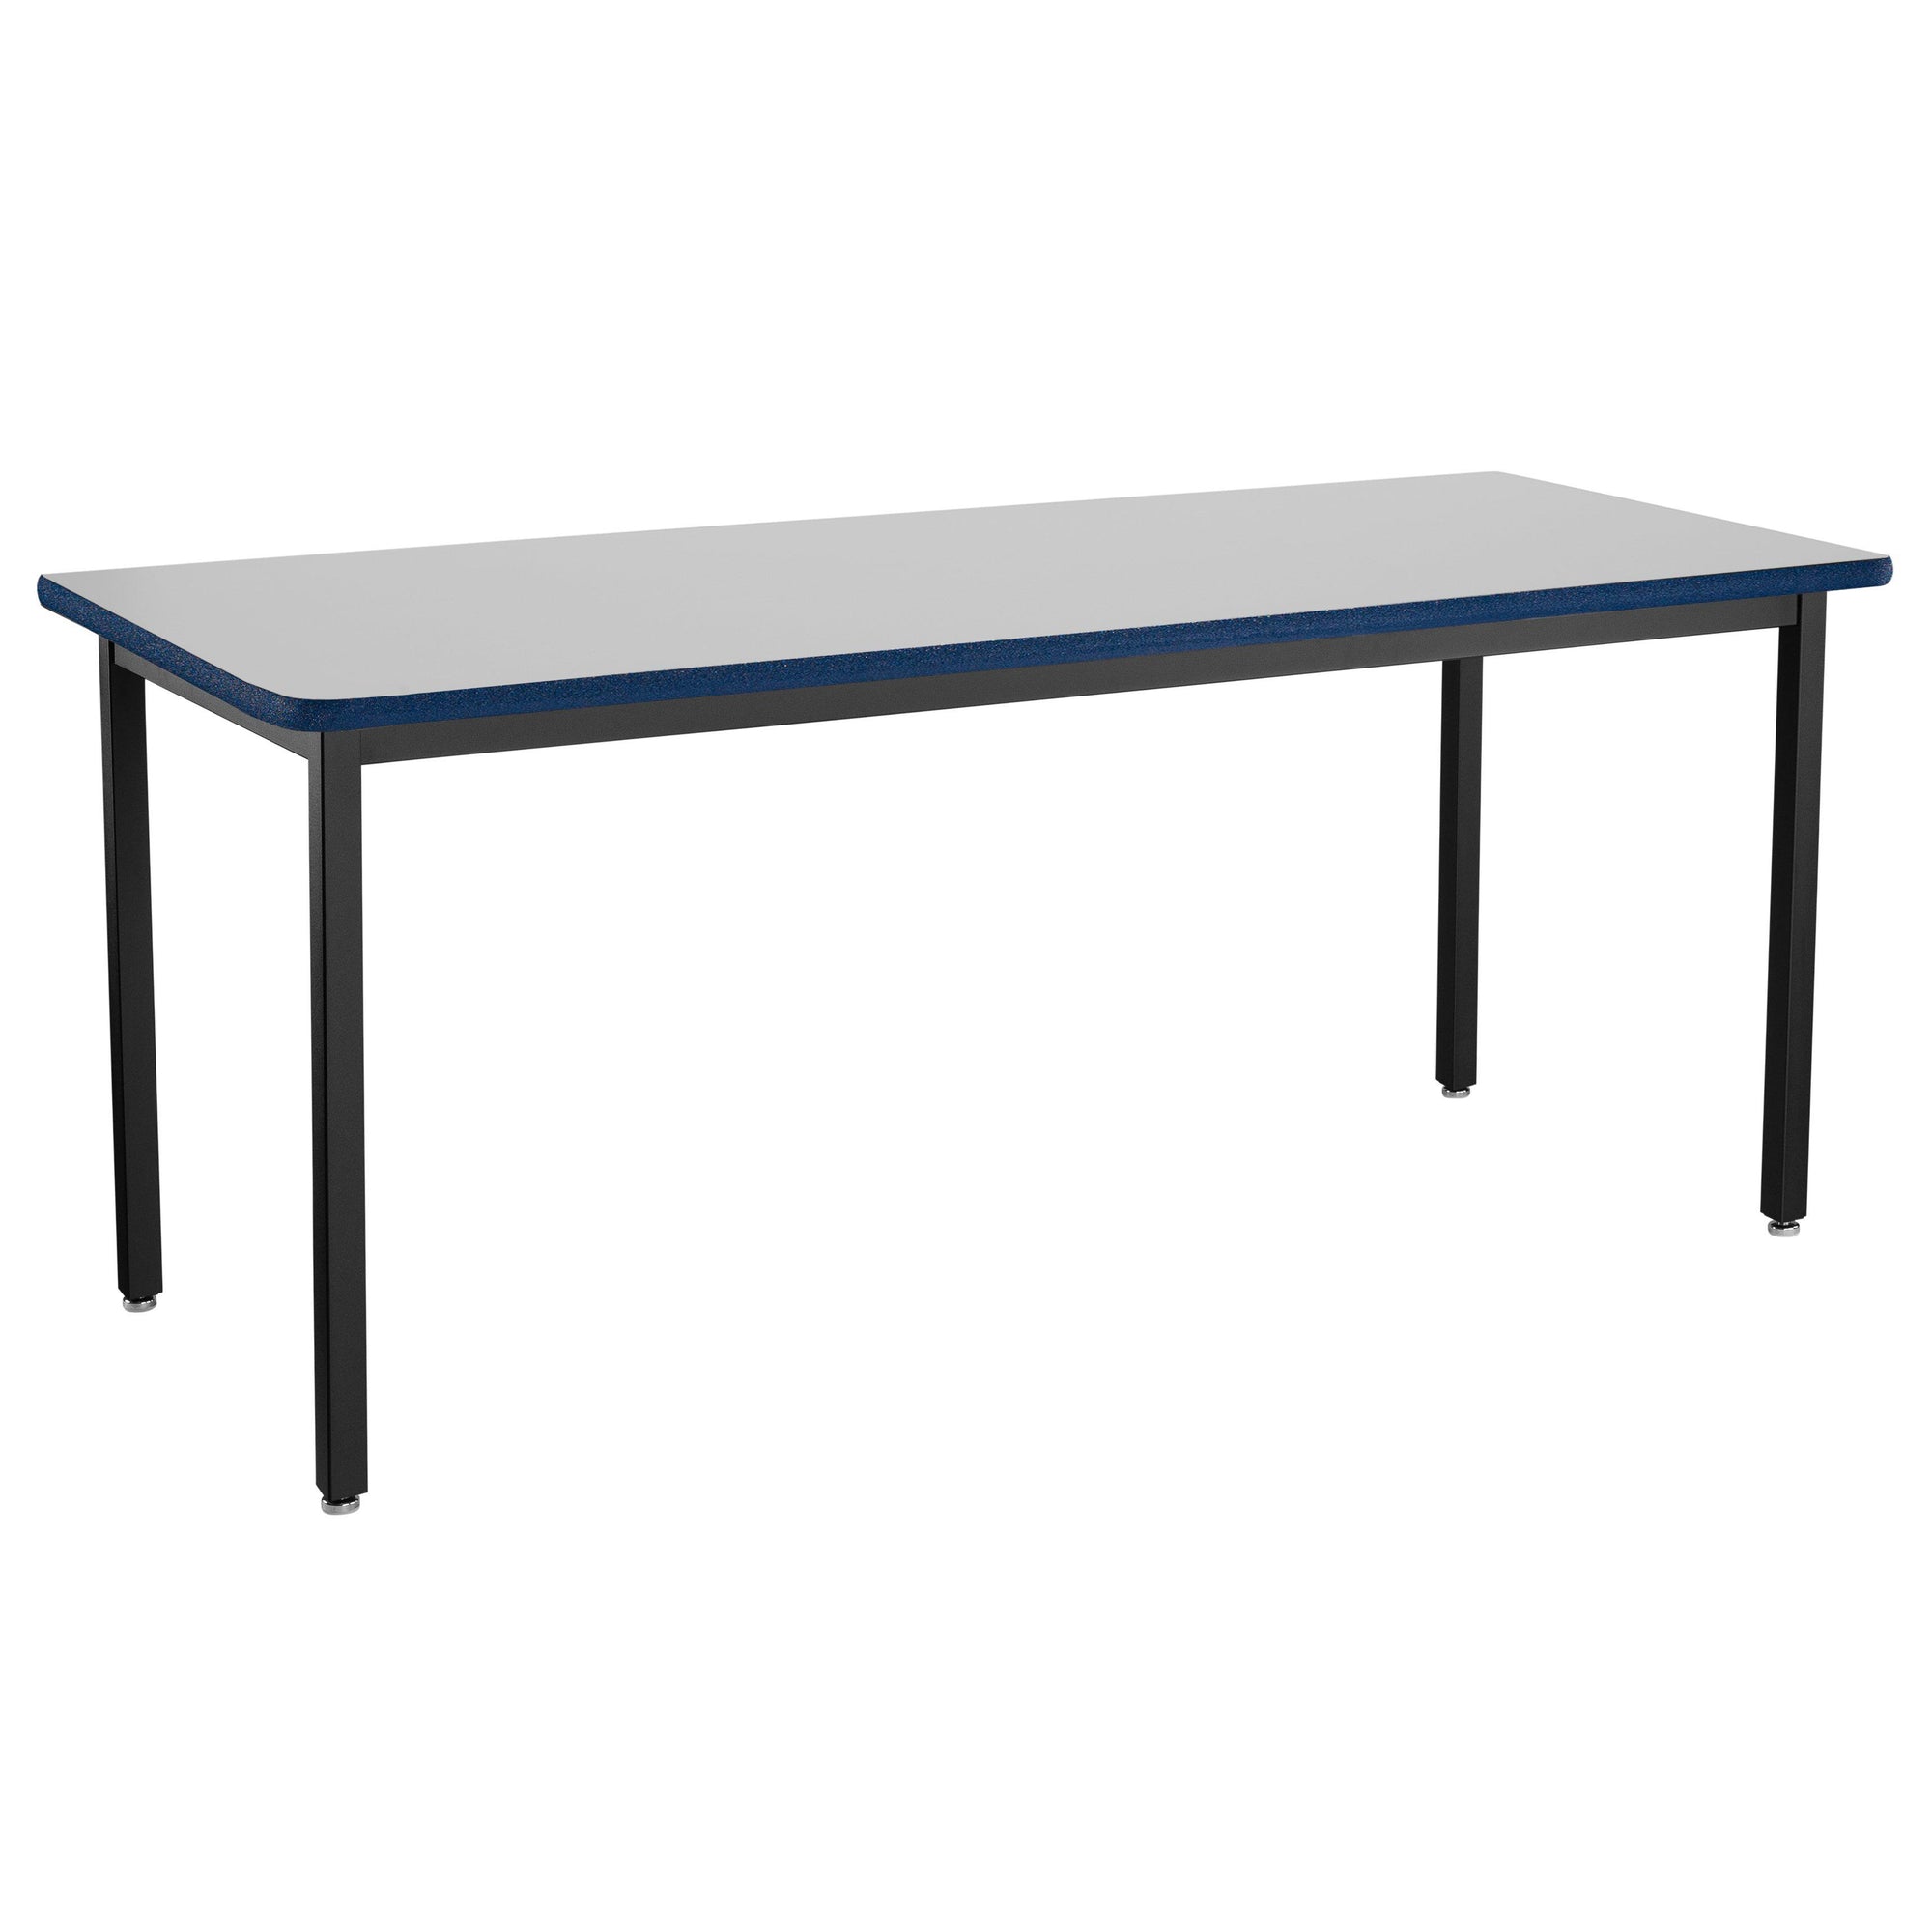 Heavy-Duty Fixed Height Utility Table, Black Frame, 24" x 72", Supreme High-Pressure Laminate Top with Black ProtectEdge